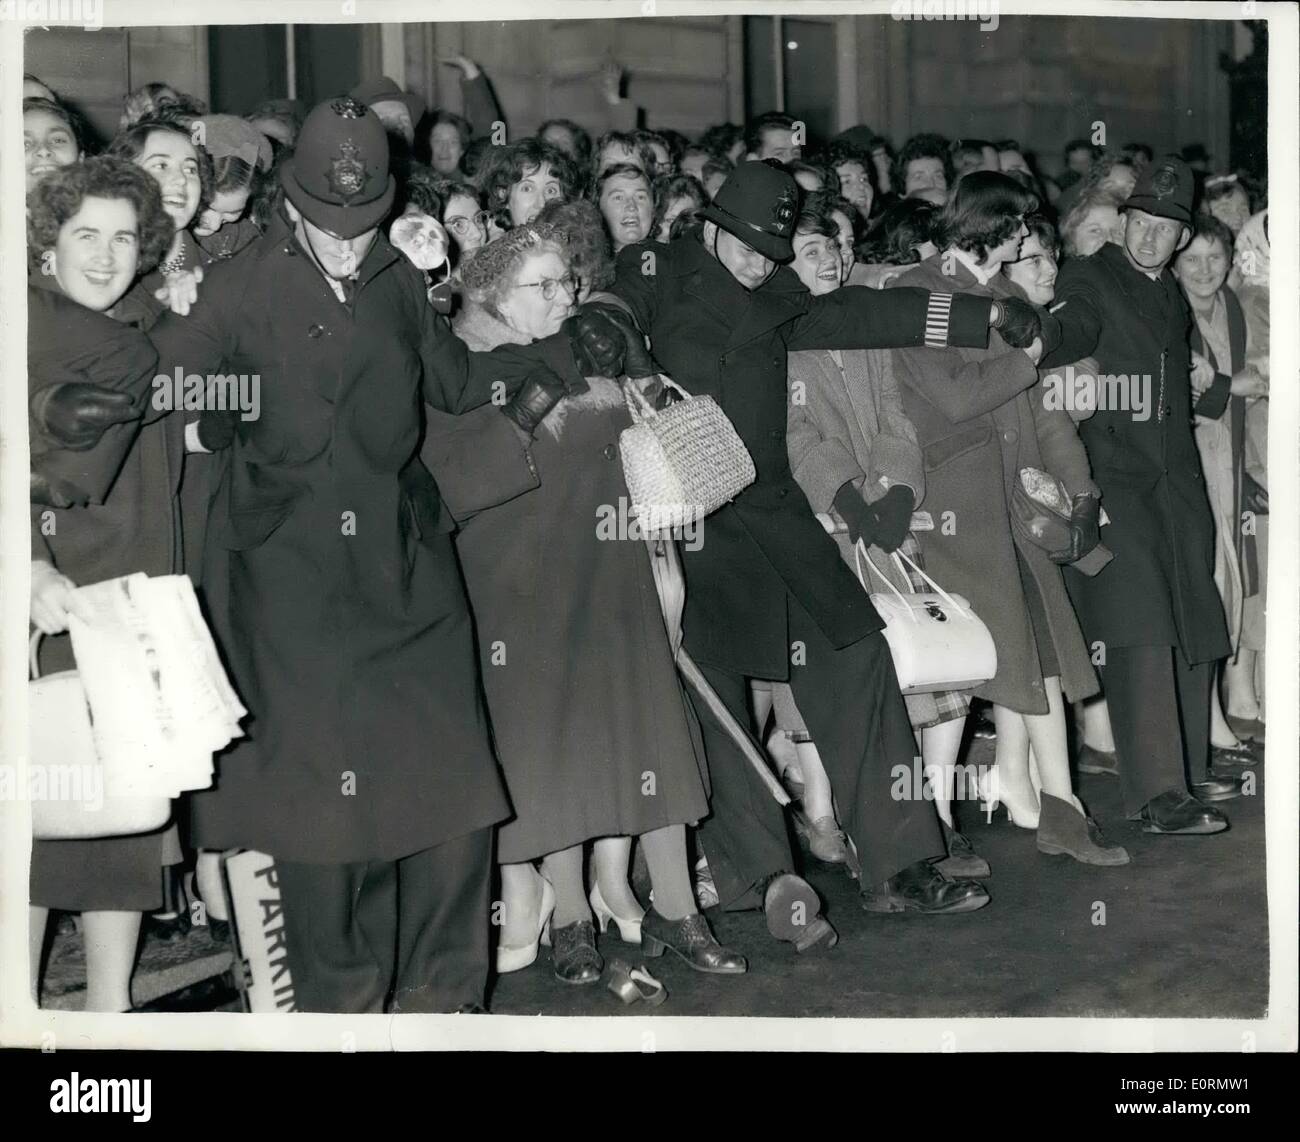 Mar. 03, 1960 - Princess Margaret and Husband-to-be and Queen Mother at Covent Garden.: Guests of honour this evening at the Royal Ballet Gars performance at Covent Garden - were the Queen Monther - Princess Margaret and her husband-to-be Tony Armstrong Jones. Photo shows police struggle to keep back the crowds awaiting the arrival of the Royal party this evening. Stock Photo